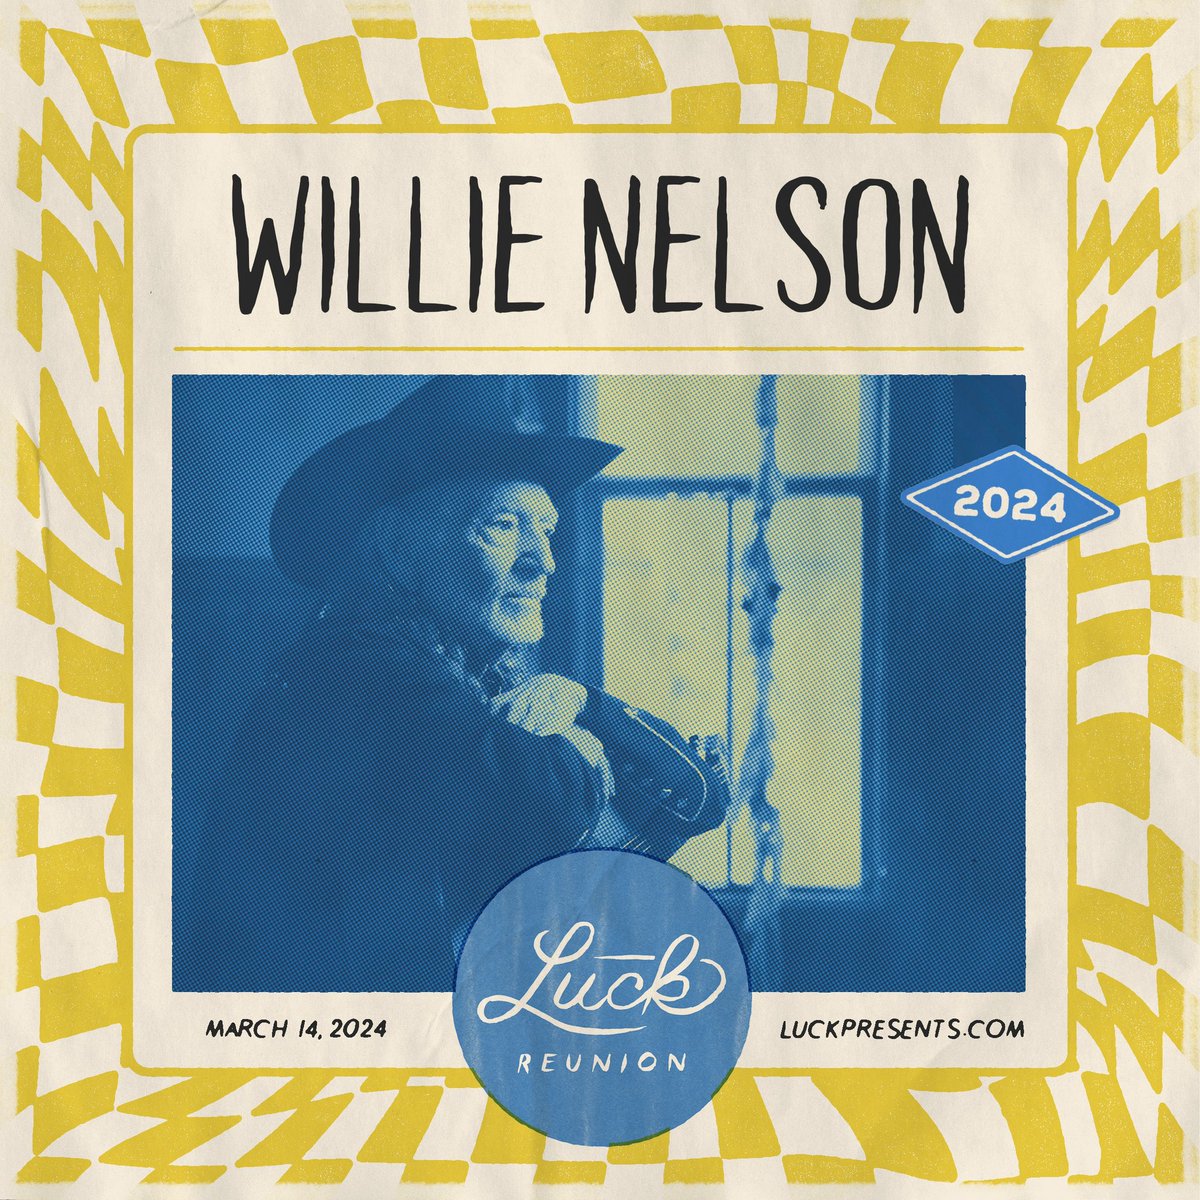 Check out @WillieNelson at @LuckReunion this Thursday (3/14/24) on the World Headquarters Stage. See you in Luck!

#luckreunion #lucktexas #worldheadquarters #willienelson